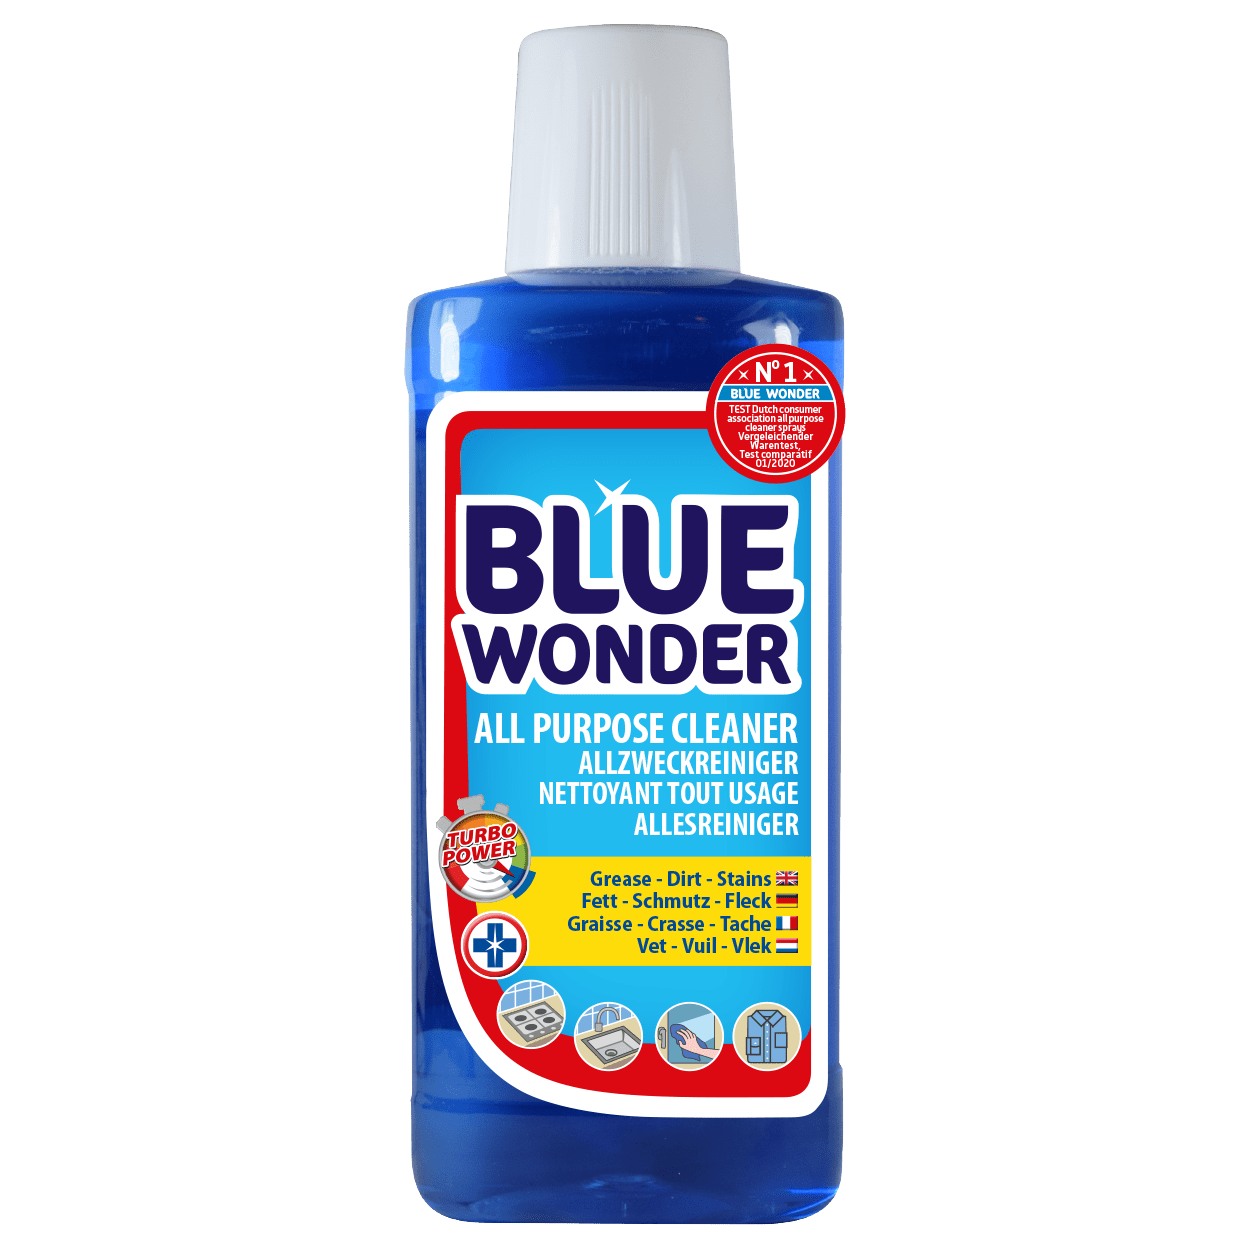 Removes grease, dirt and all kinds of stains (even from clothing). Can be used to clean doors, kitchen, bathroom, countertop, extractor hood, cupboards, windows, mirrors, car rims, wood and garden furniture, to name a few.